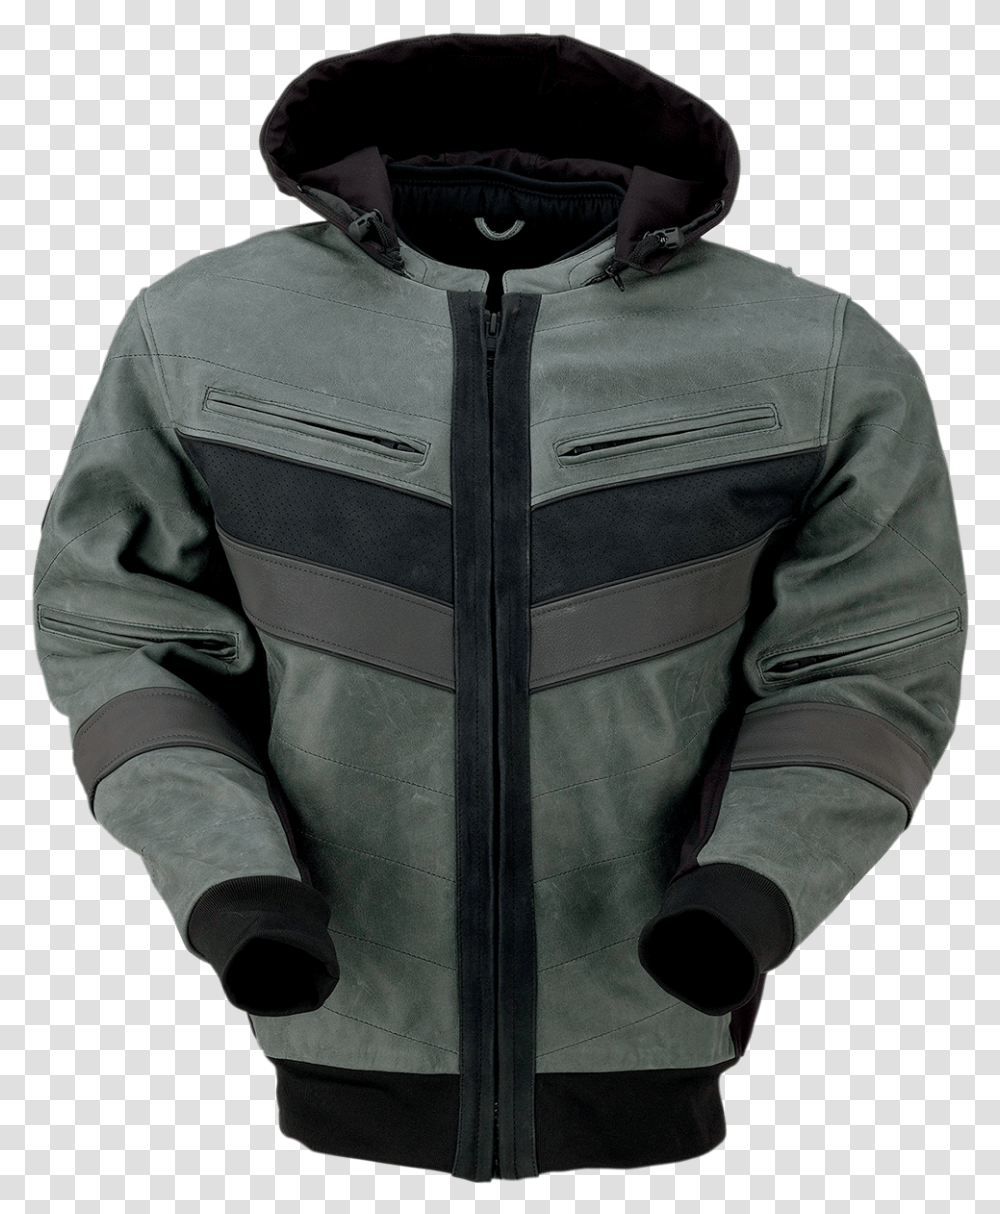 Details About New Z1r Thrasher Leather Jacket Hooded, Clothing, Apparel, Coat, Sweatshirt Transparent Png